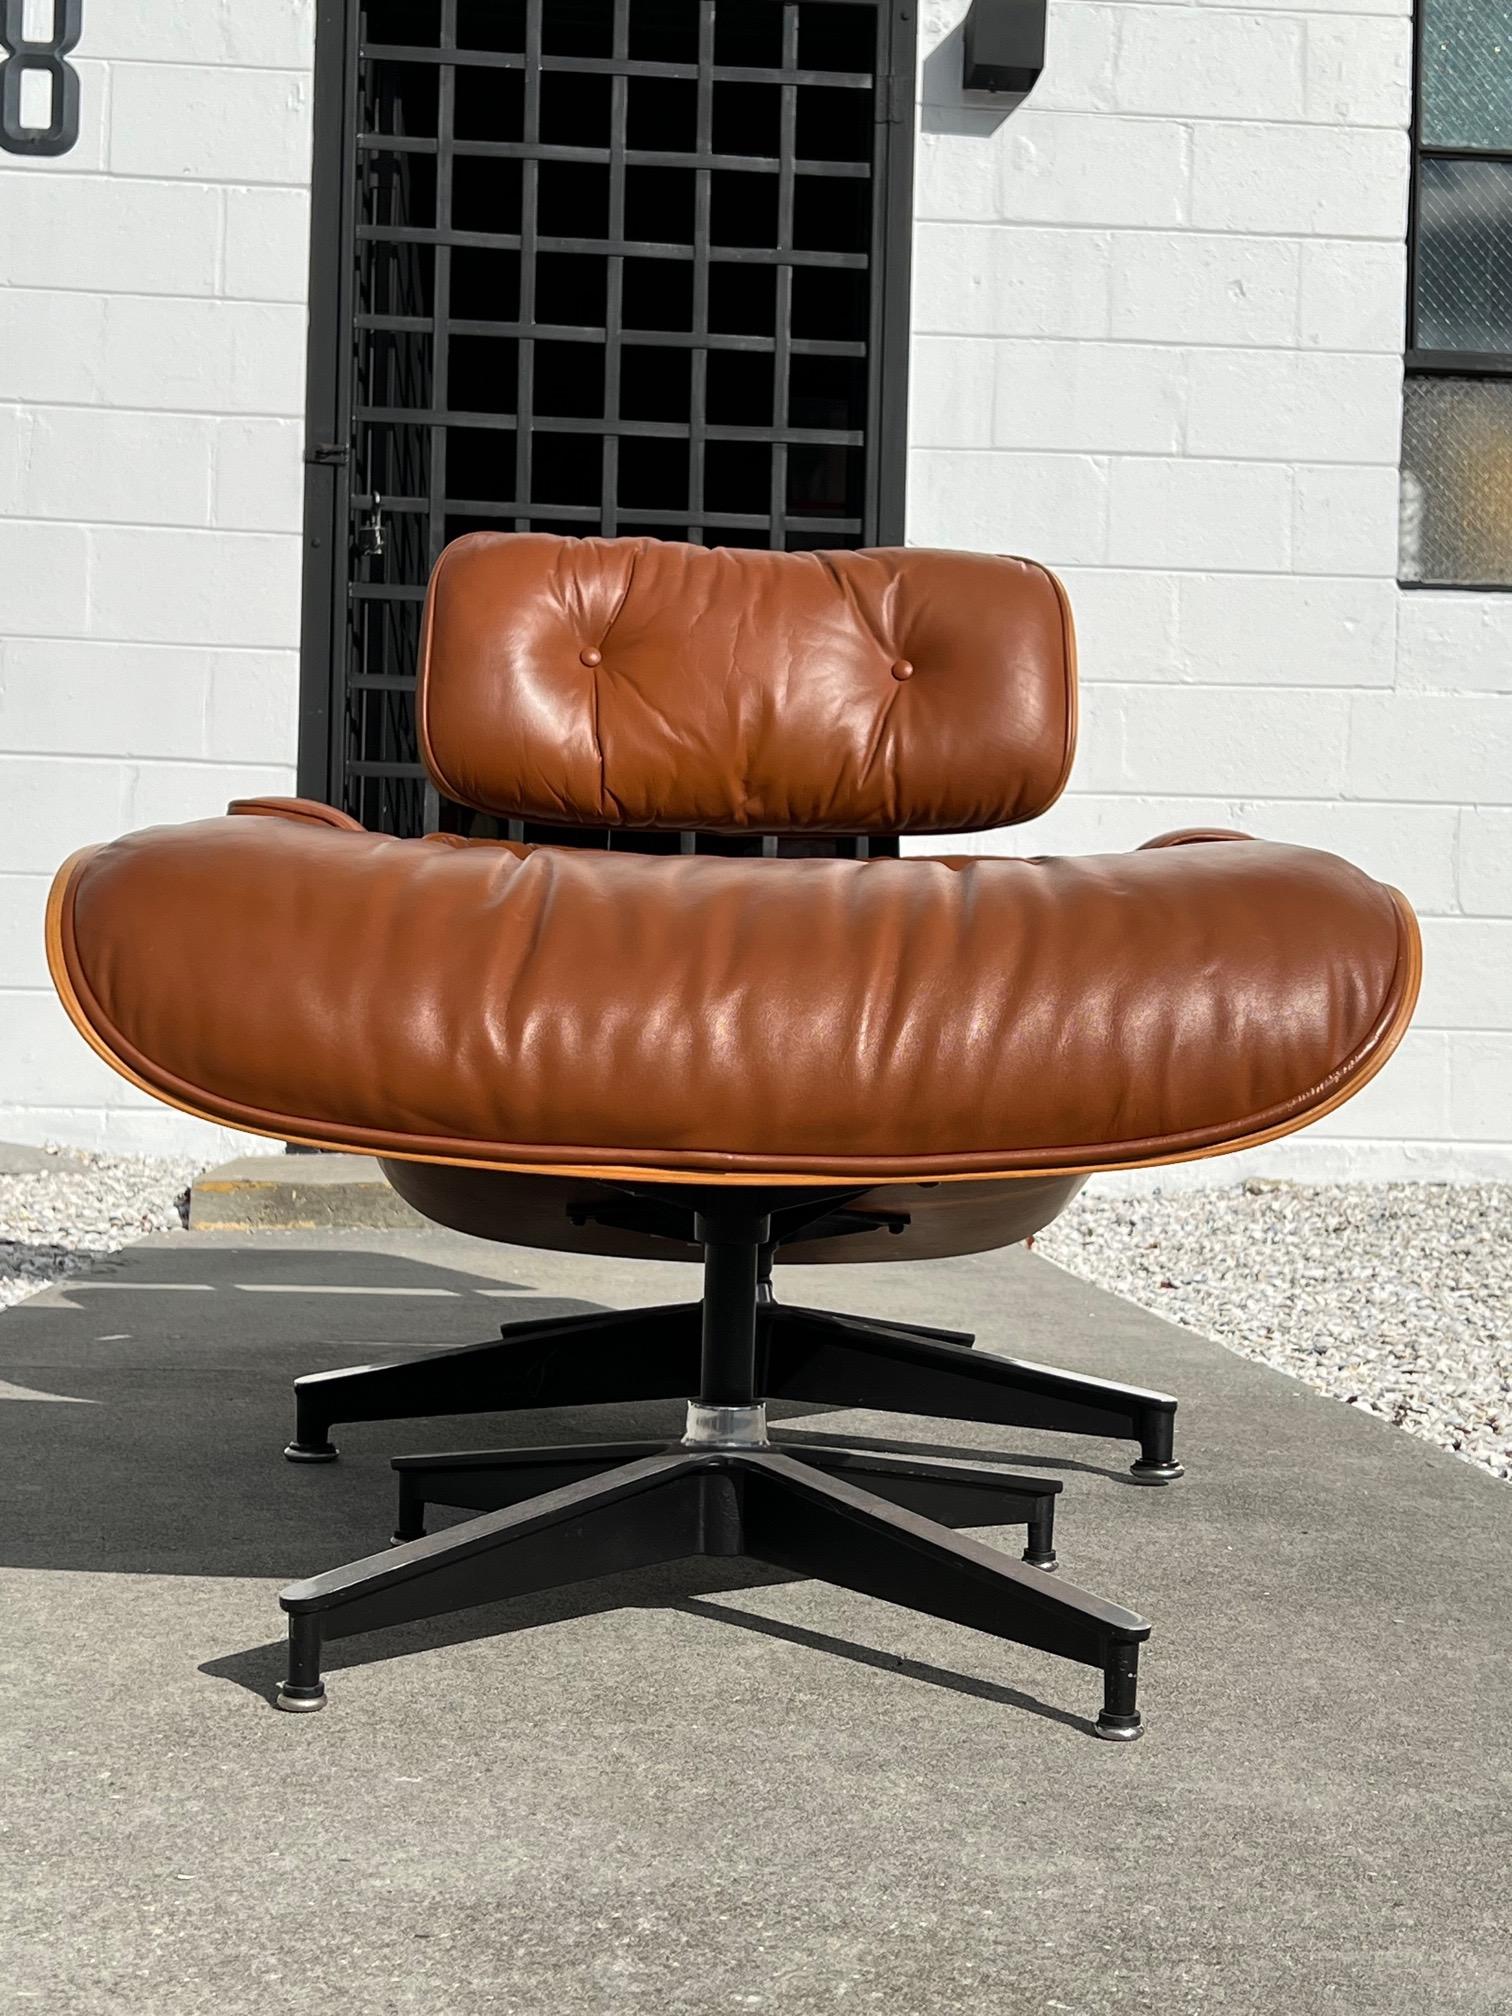 American Classic Charles Eames Herman Miller Lounge Chair 1980's Cognac Brown Leather